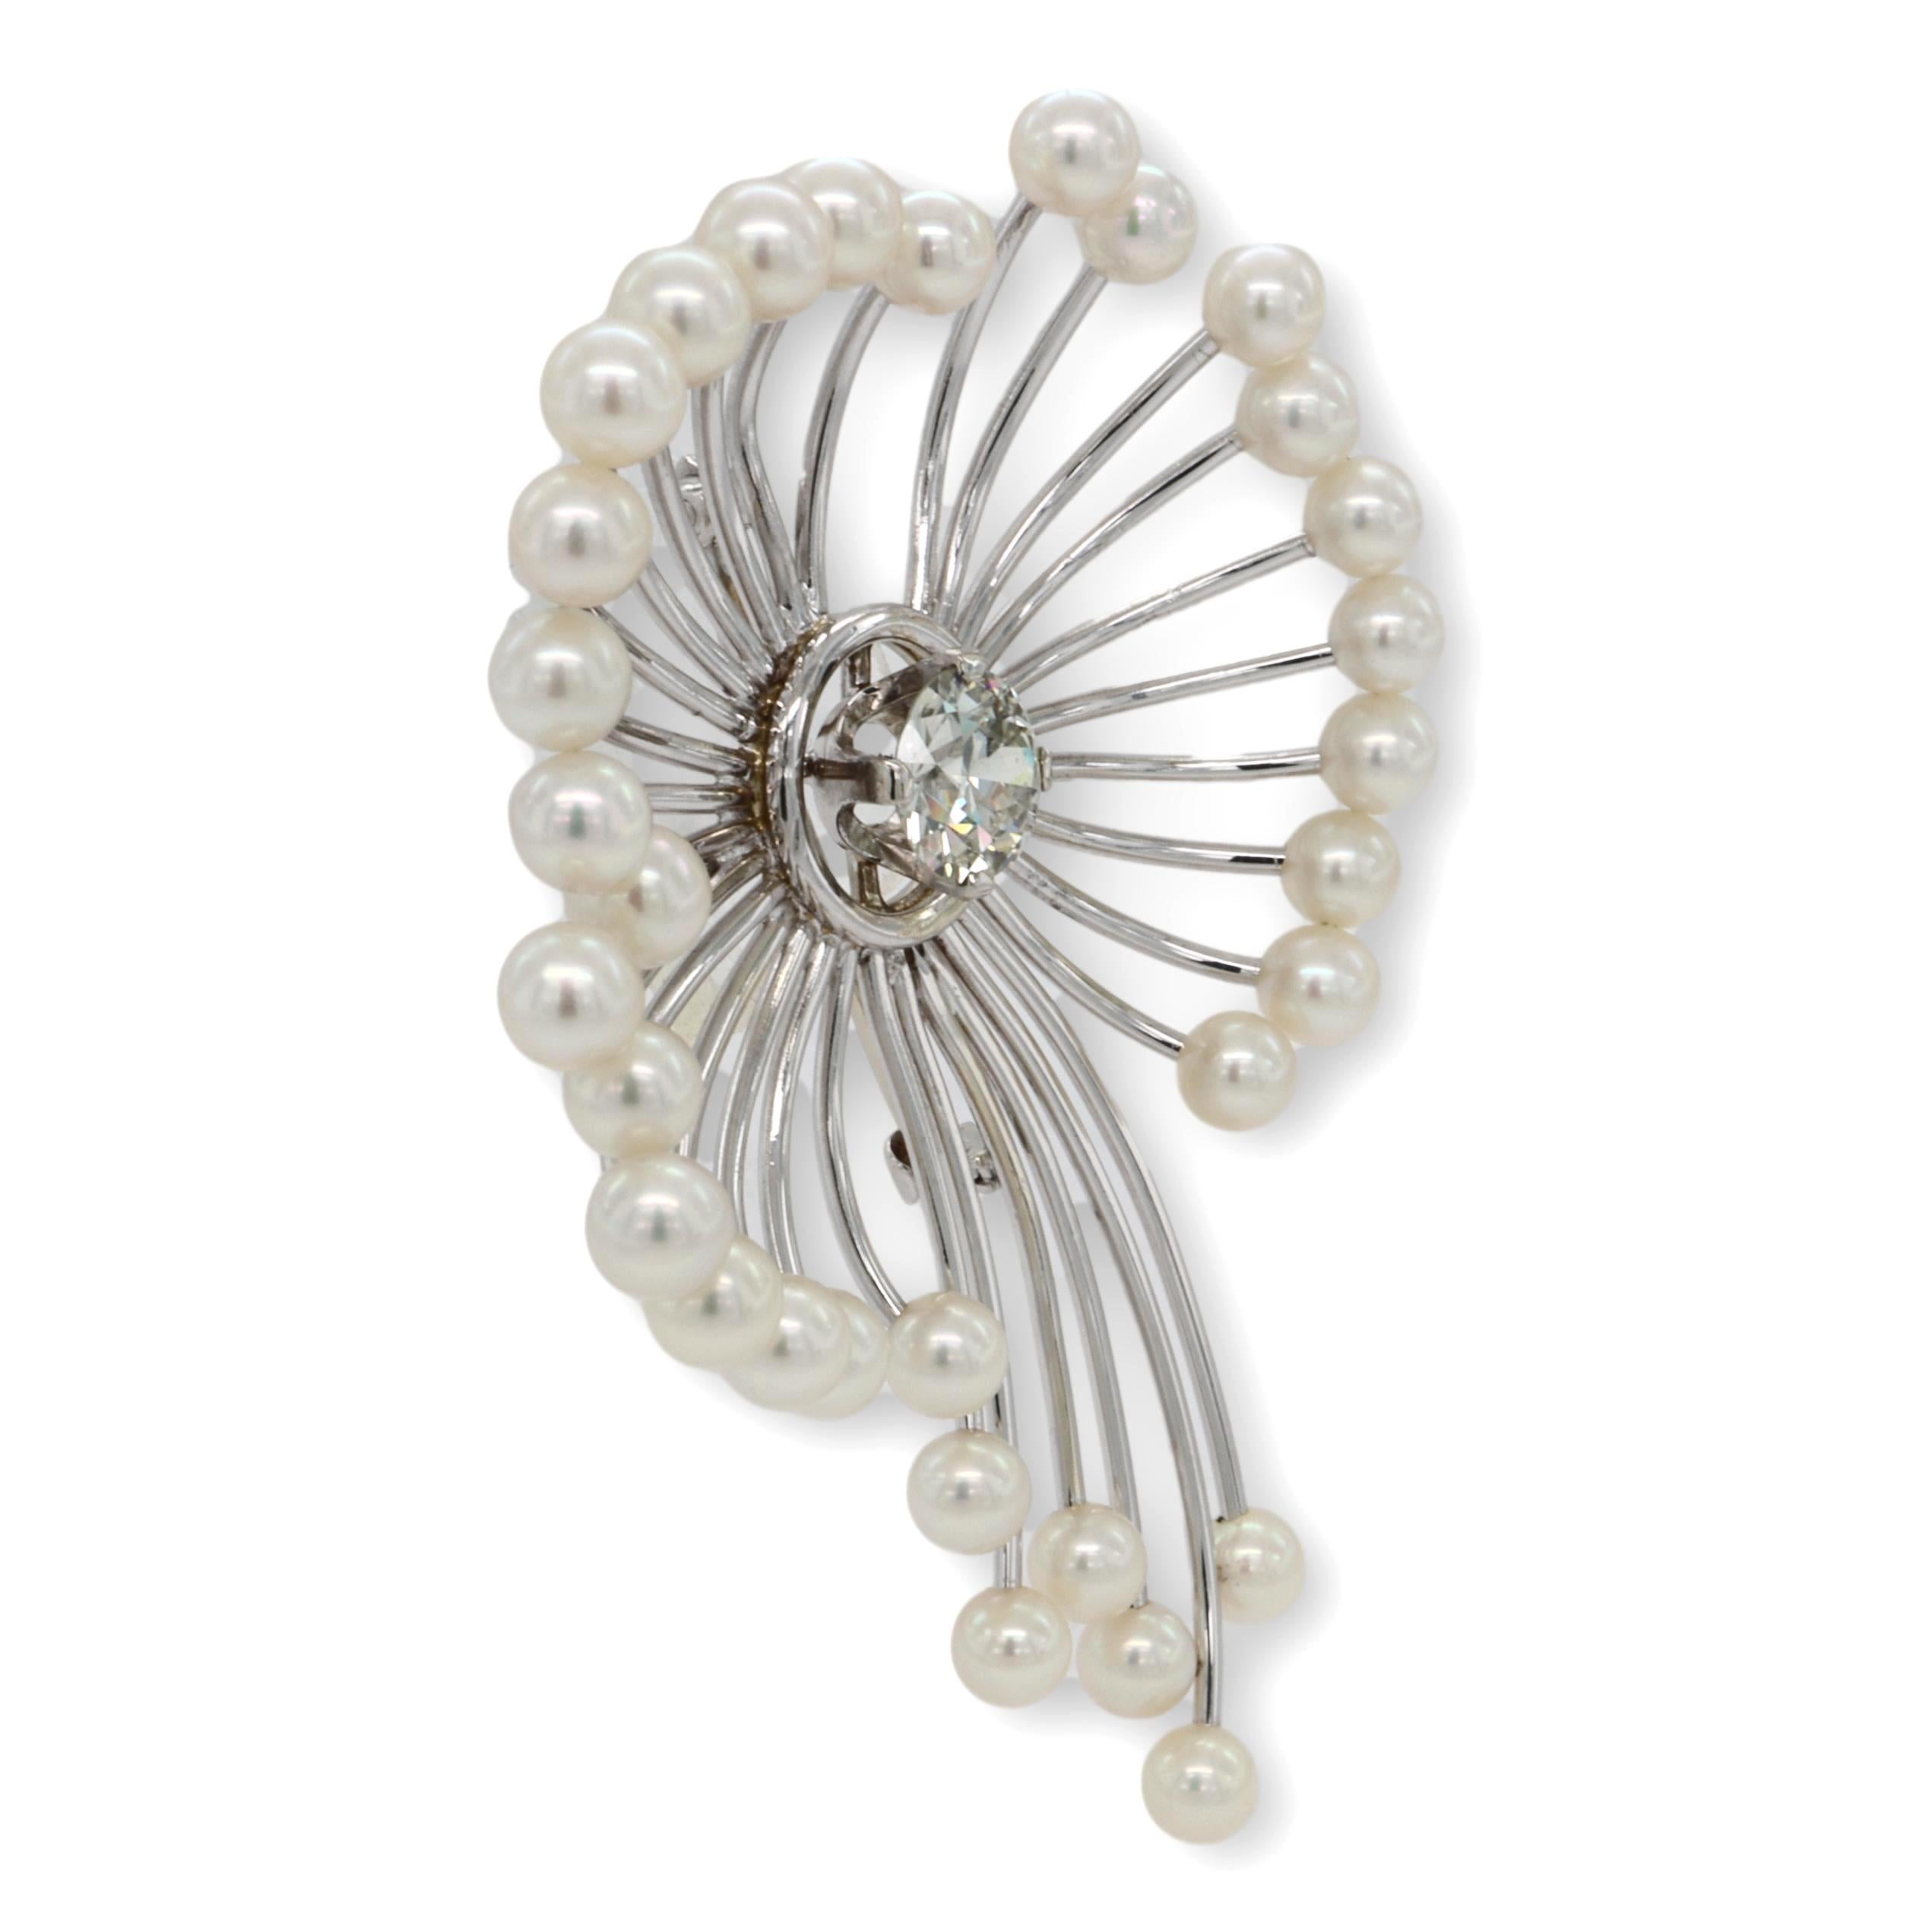 Vintage brooch finely crafted in 14 Karat white gold featuring an old-european cut diamond center weighing 1.25 carats, eye- clean diamond adorned with 32 Akoya 4.0-4.3 mm seed pearls in an open flower shape design. Pin closure with C clasp and